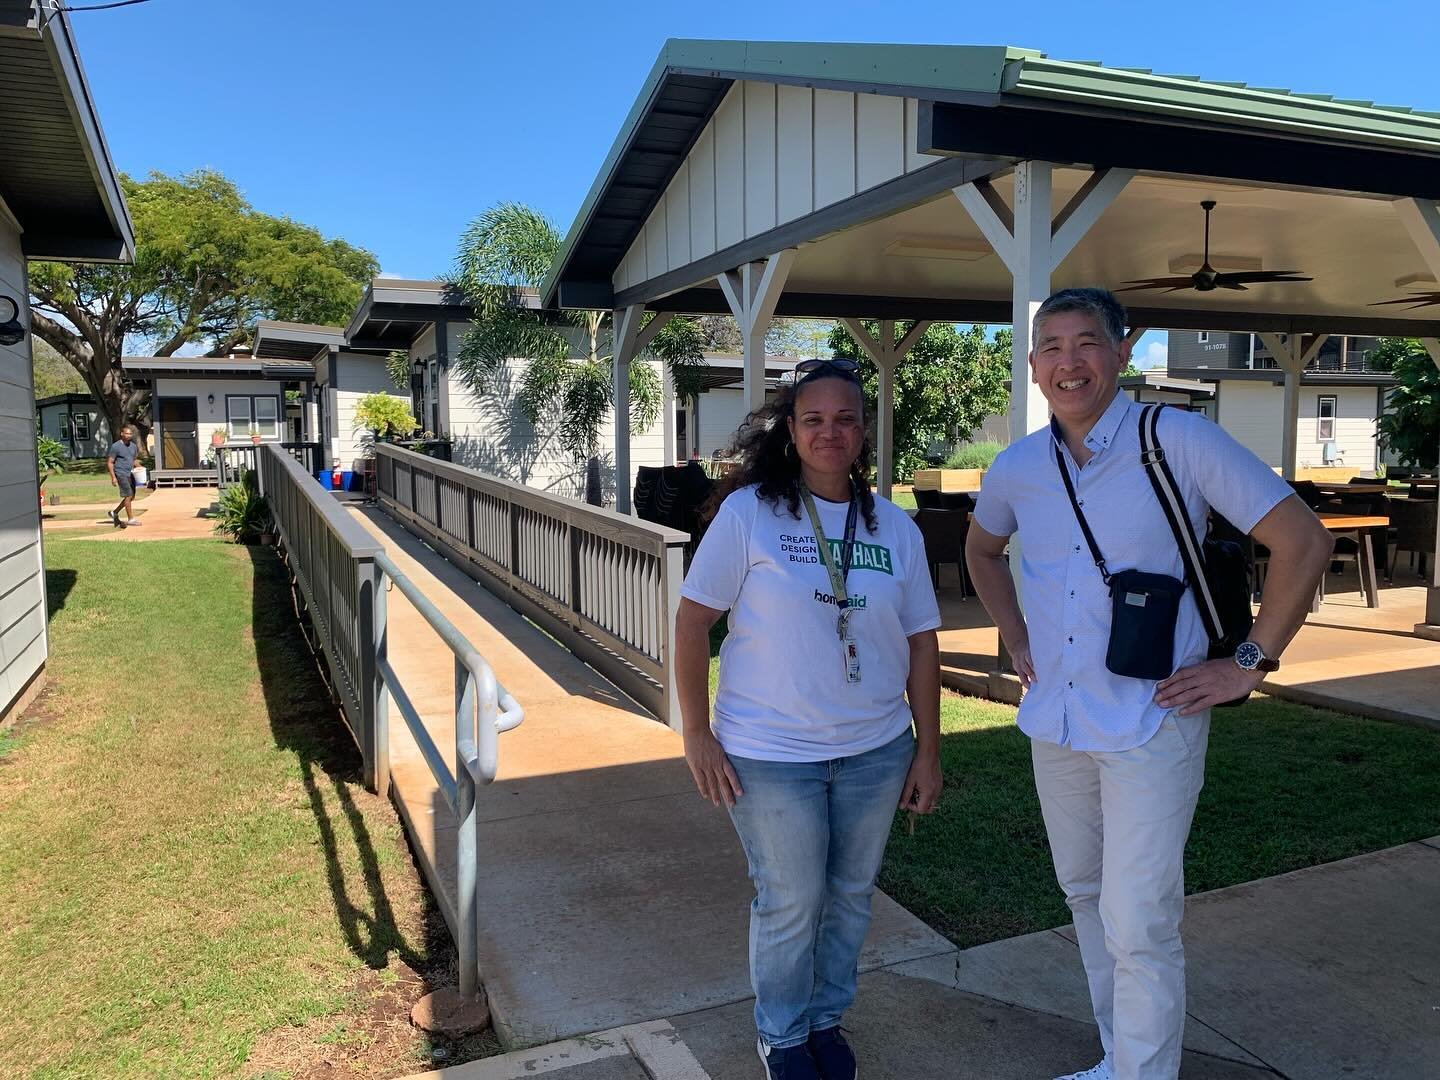 Veterans Tiny Home Community &ldquo;Kamaoku&rdquo; on the old Navy Base on Oahu, HI, with facility coordinator Macy. There was lots to learn from how well this complex is set up! #housedecoration